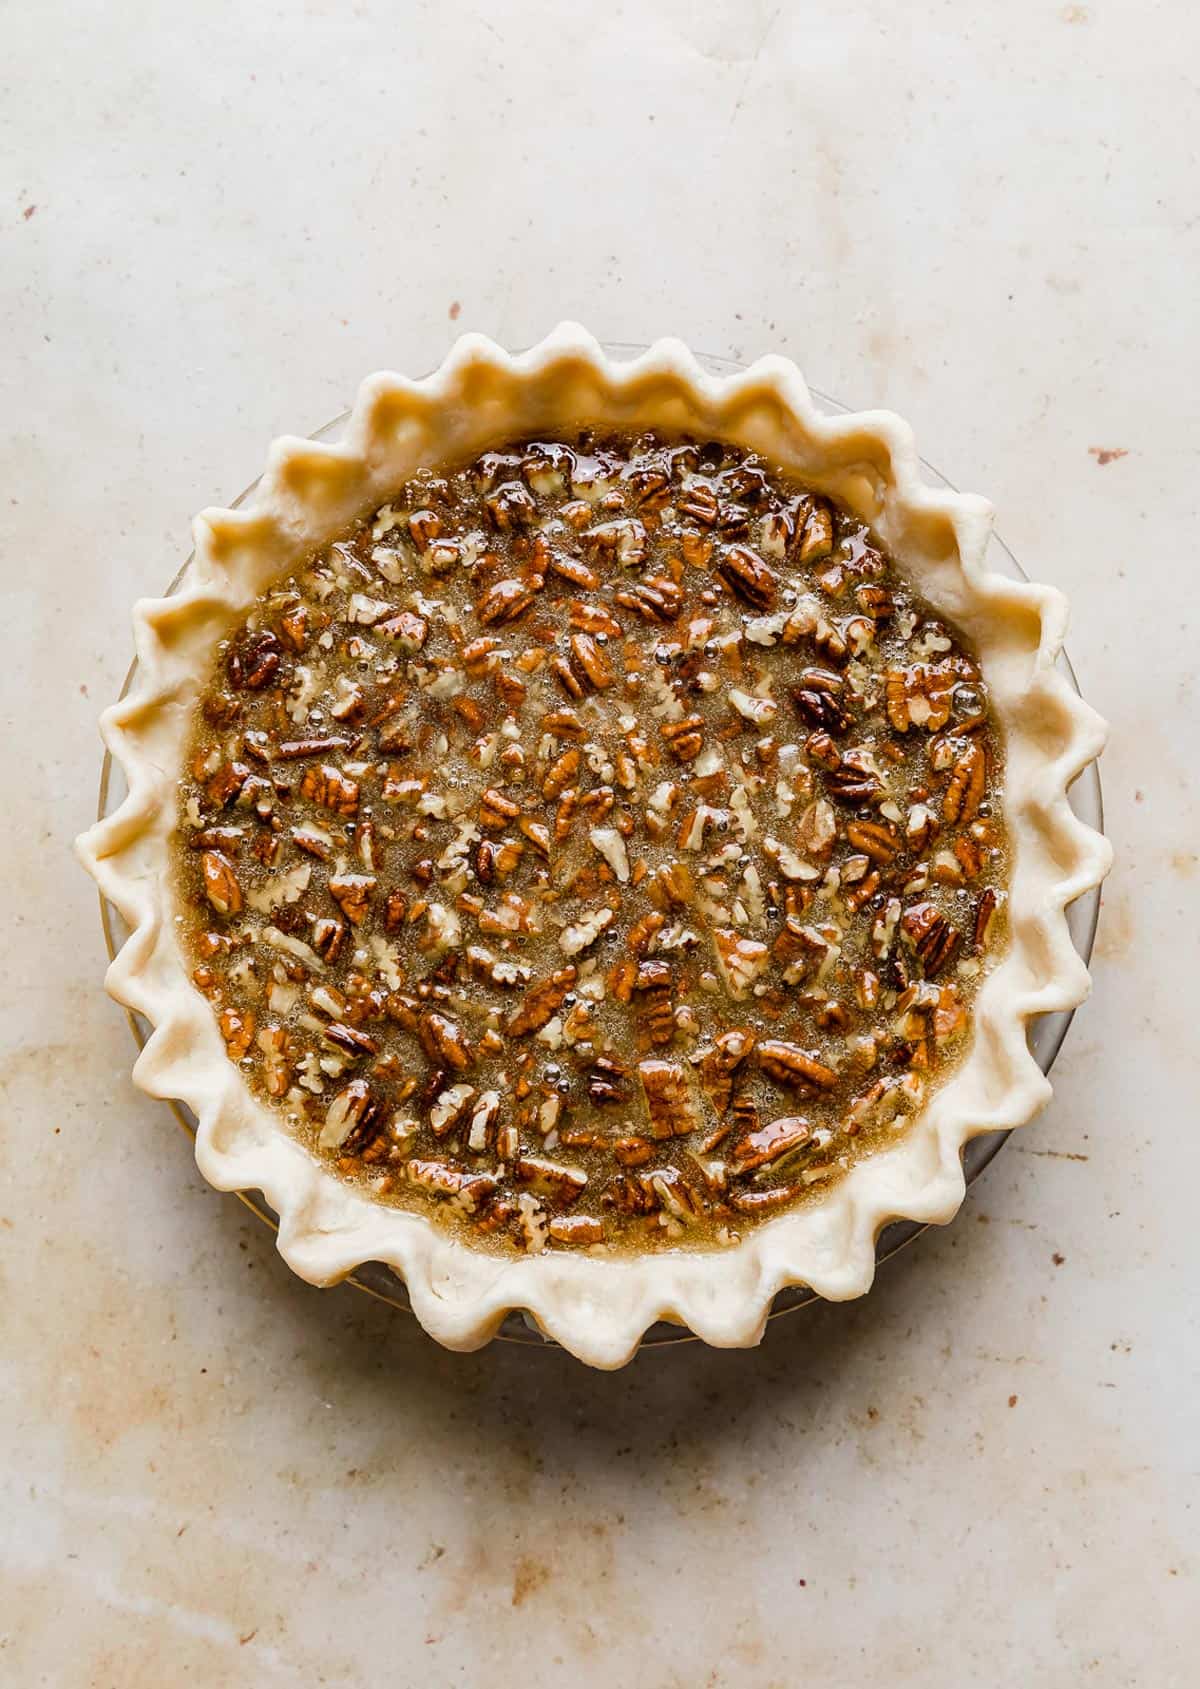 An unbaked southern pecan pie on a cream colored background.